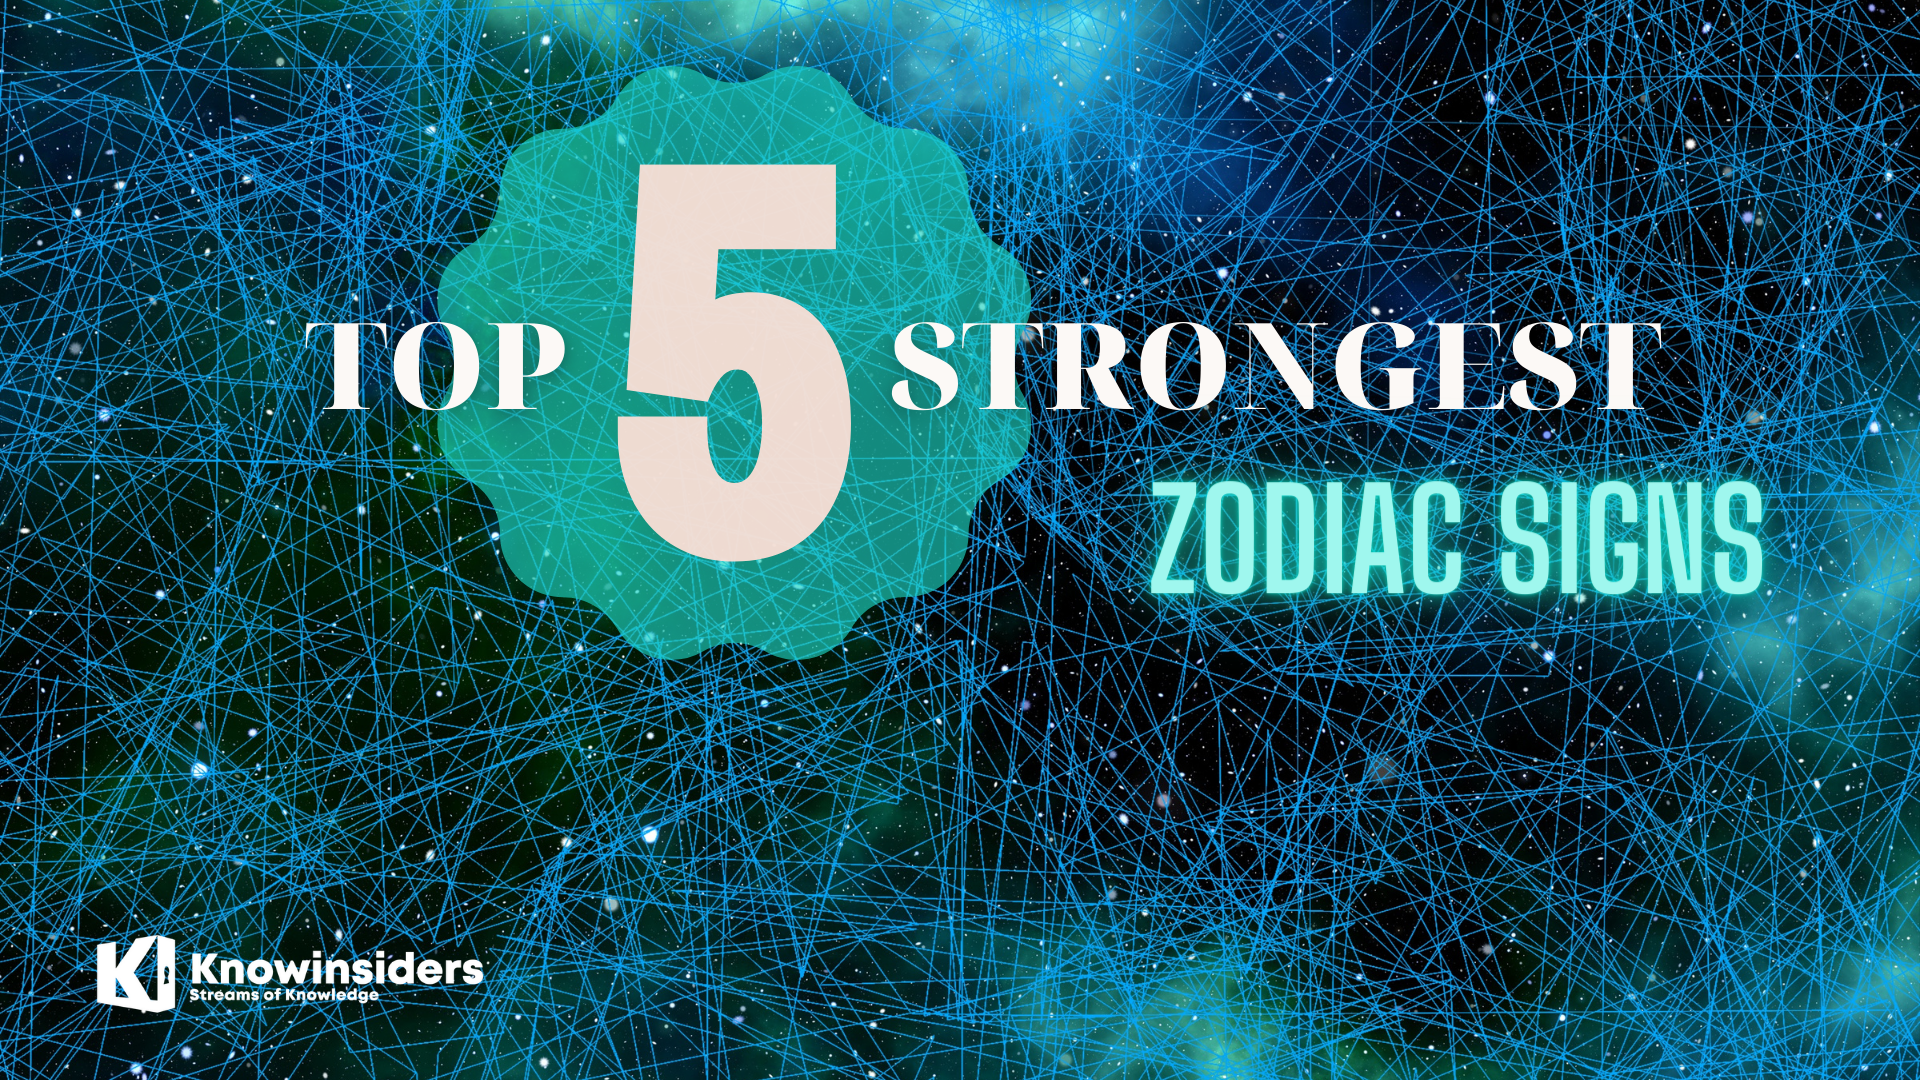 What is the strongest sign in the zodiac